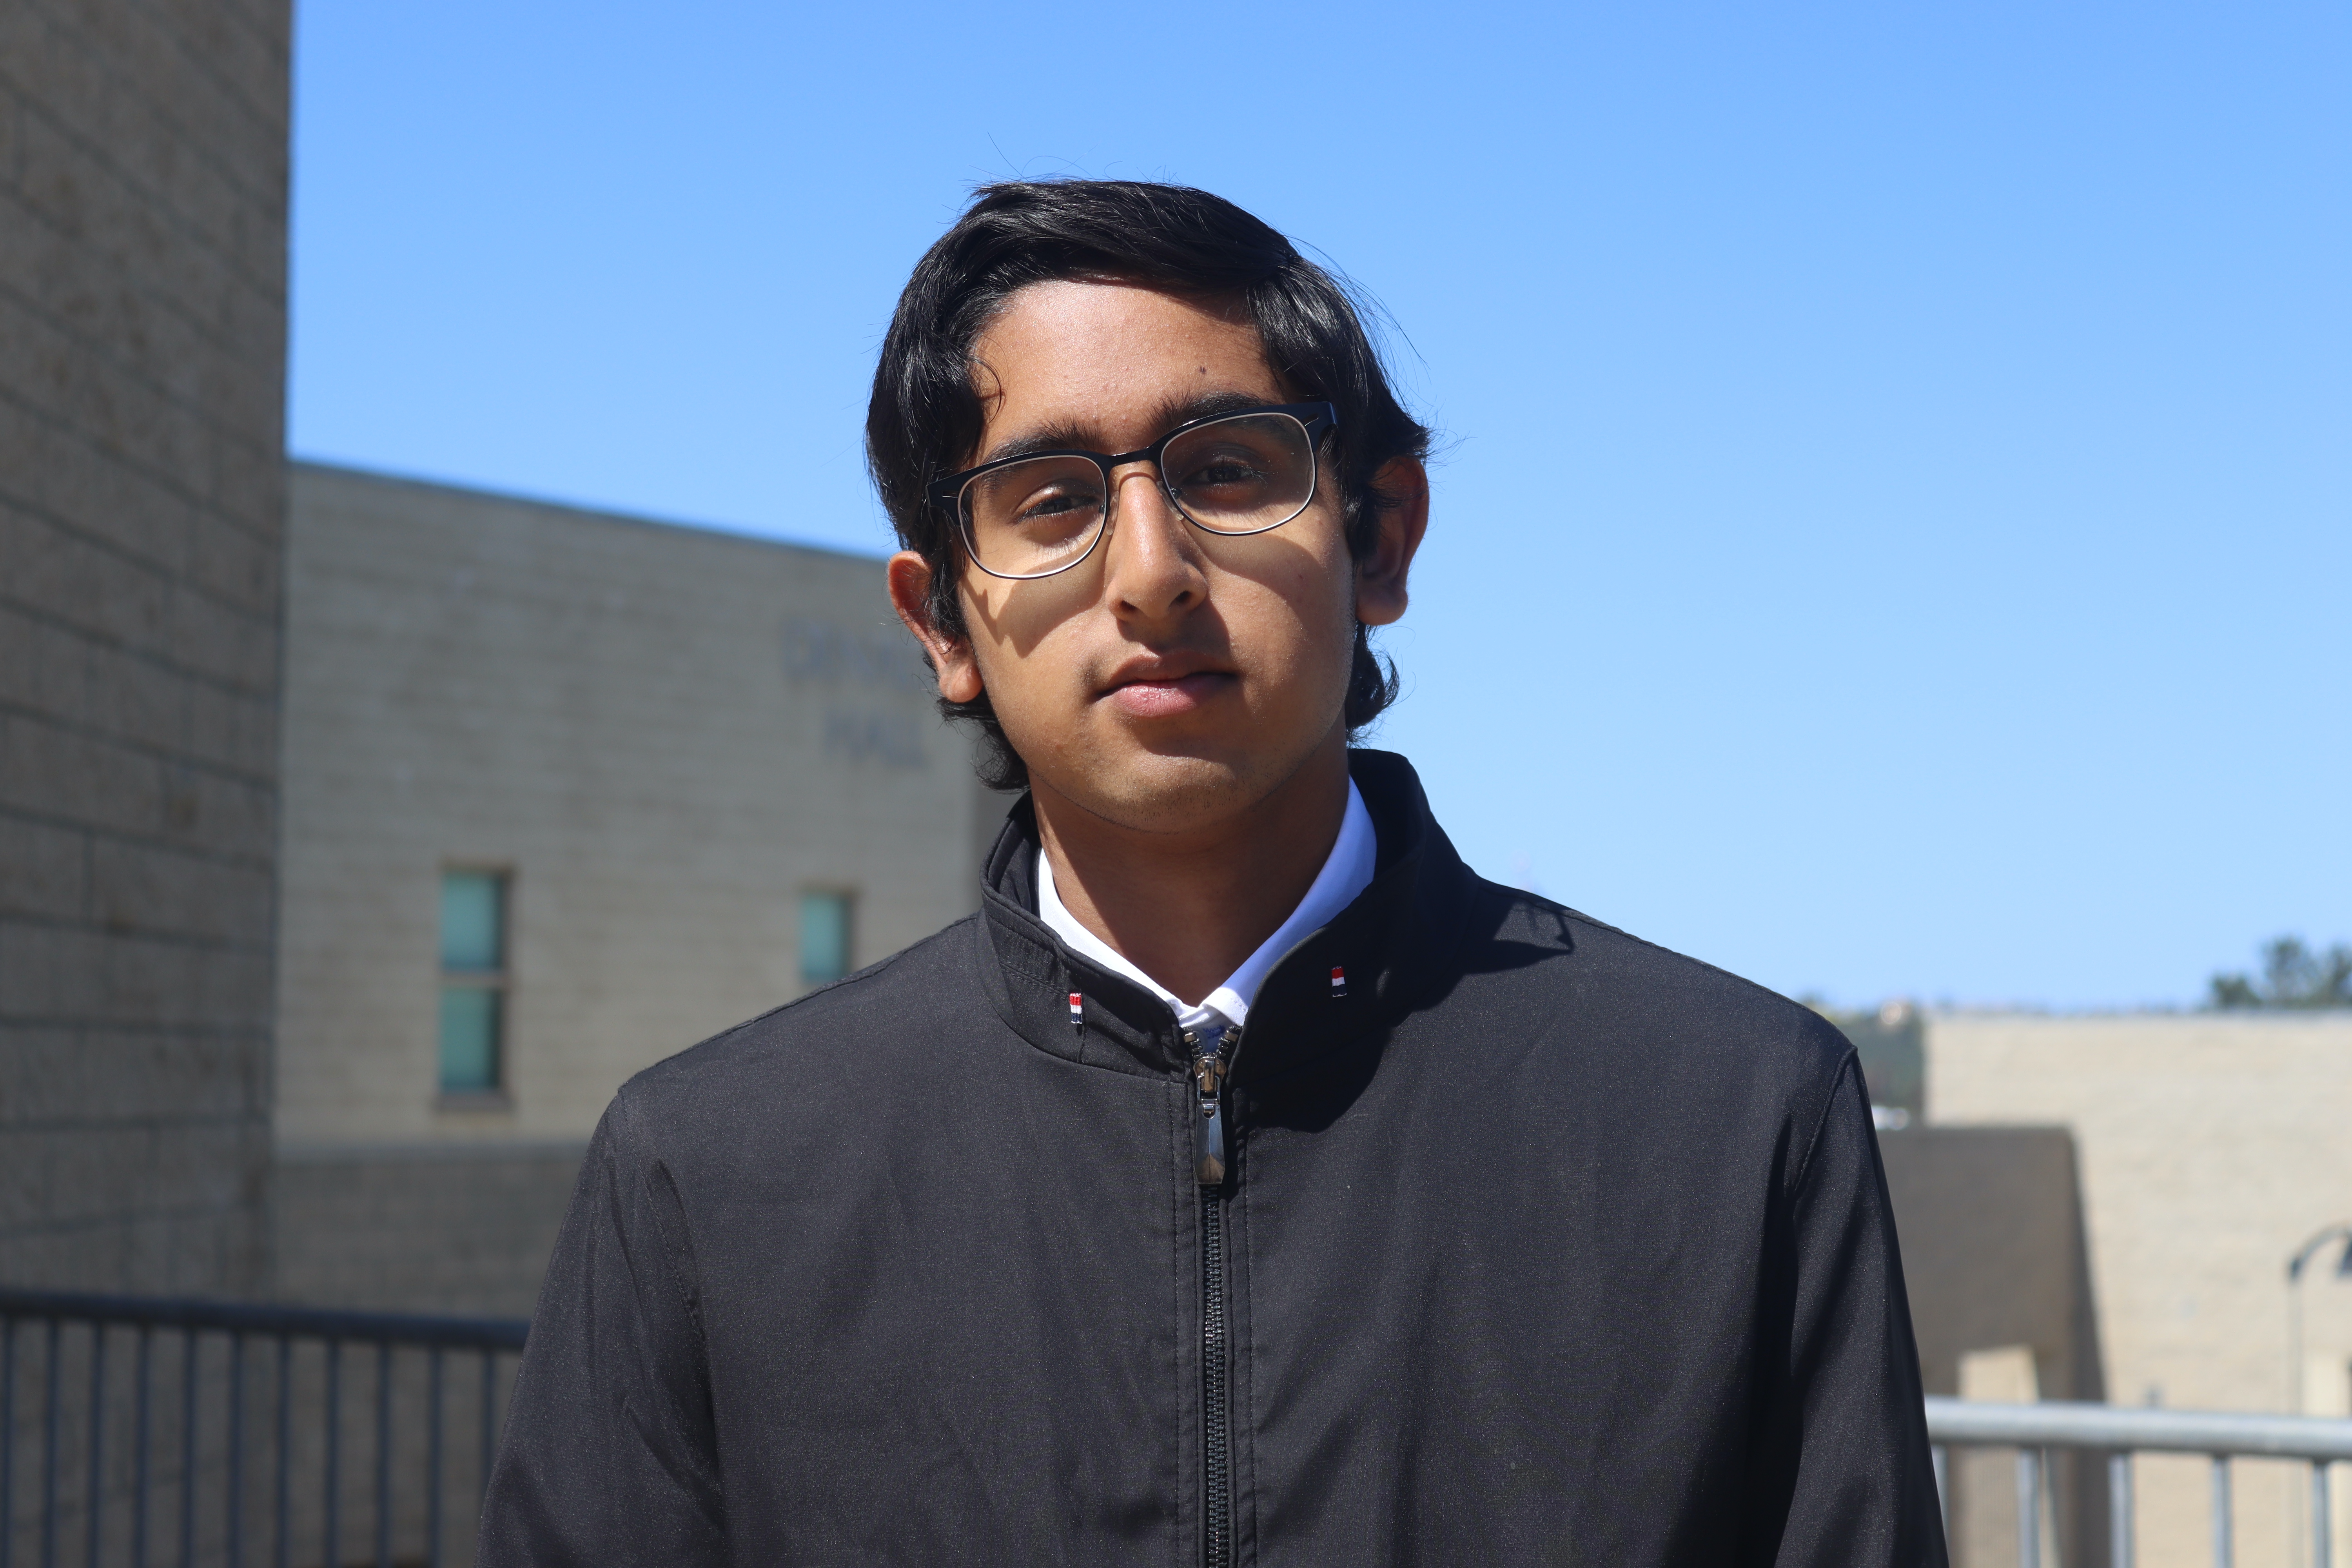 Senior Ashwin Bardhwaj is ready to embark on a new chapter of his life.